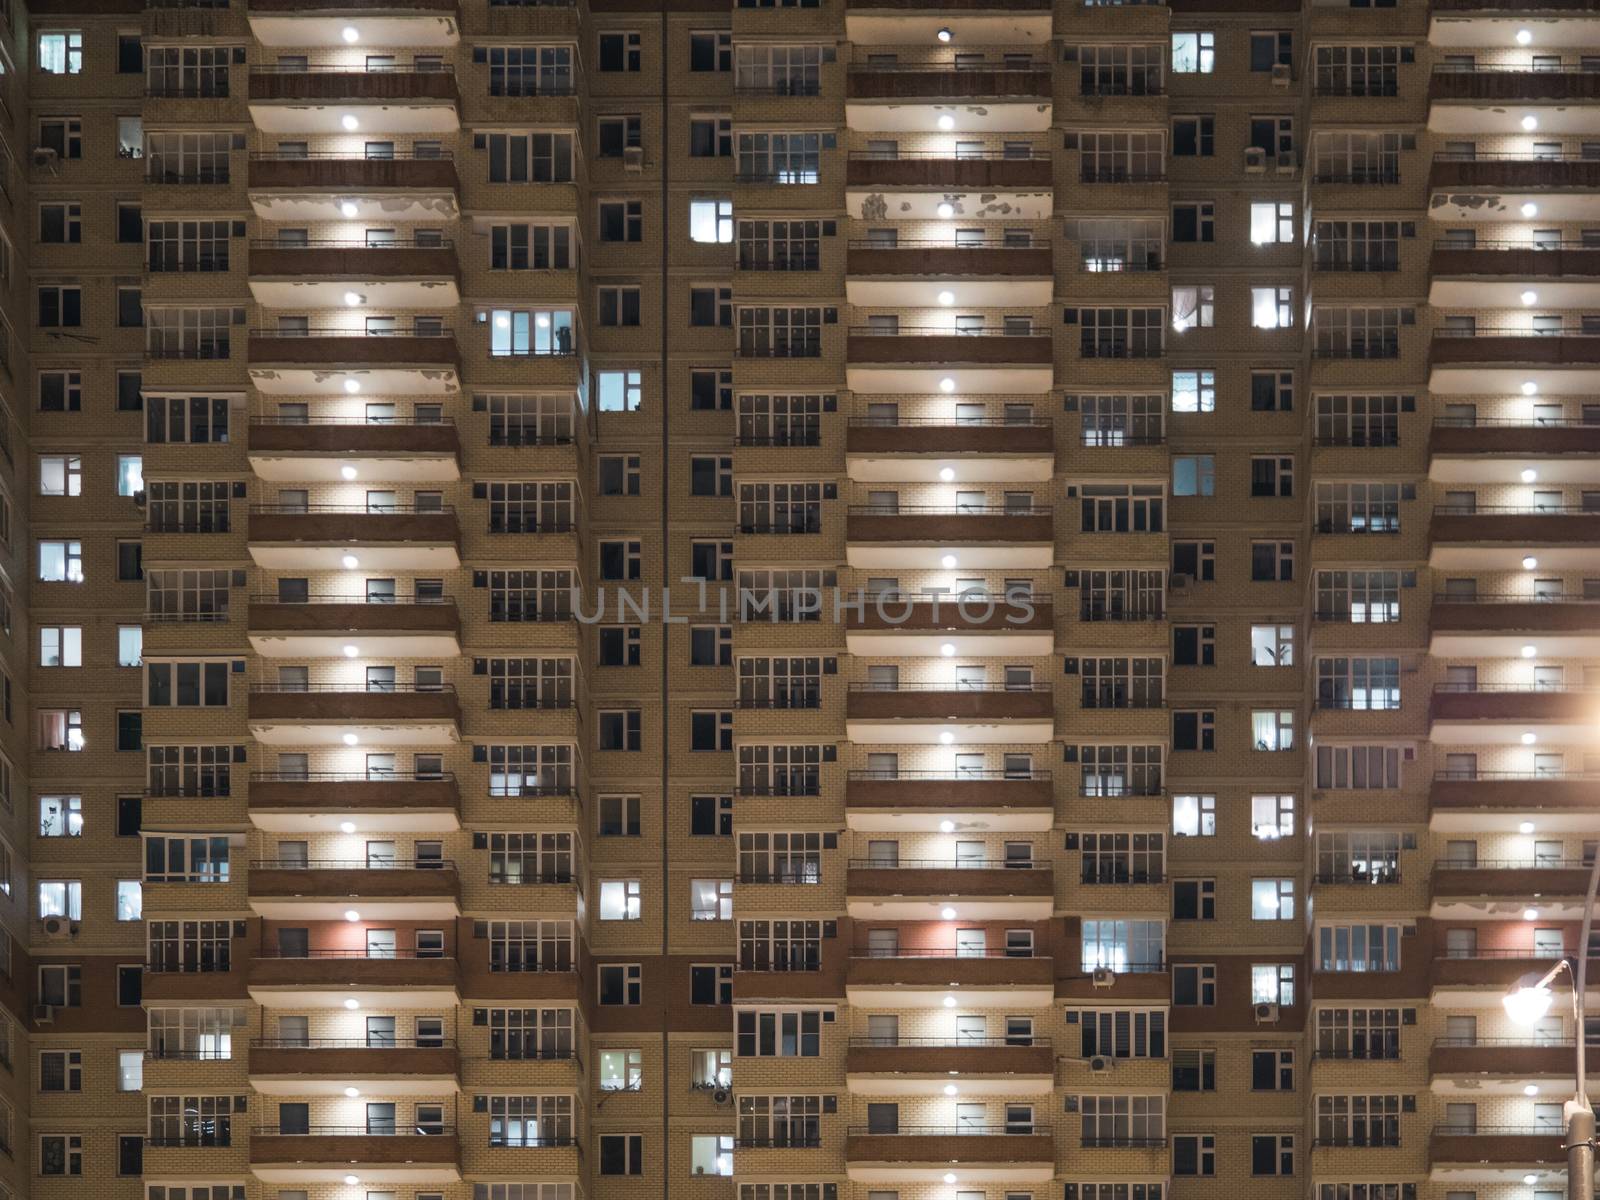 Apartment building in night by fascinadora